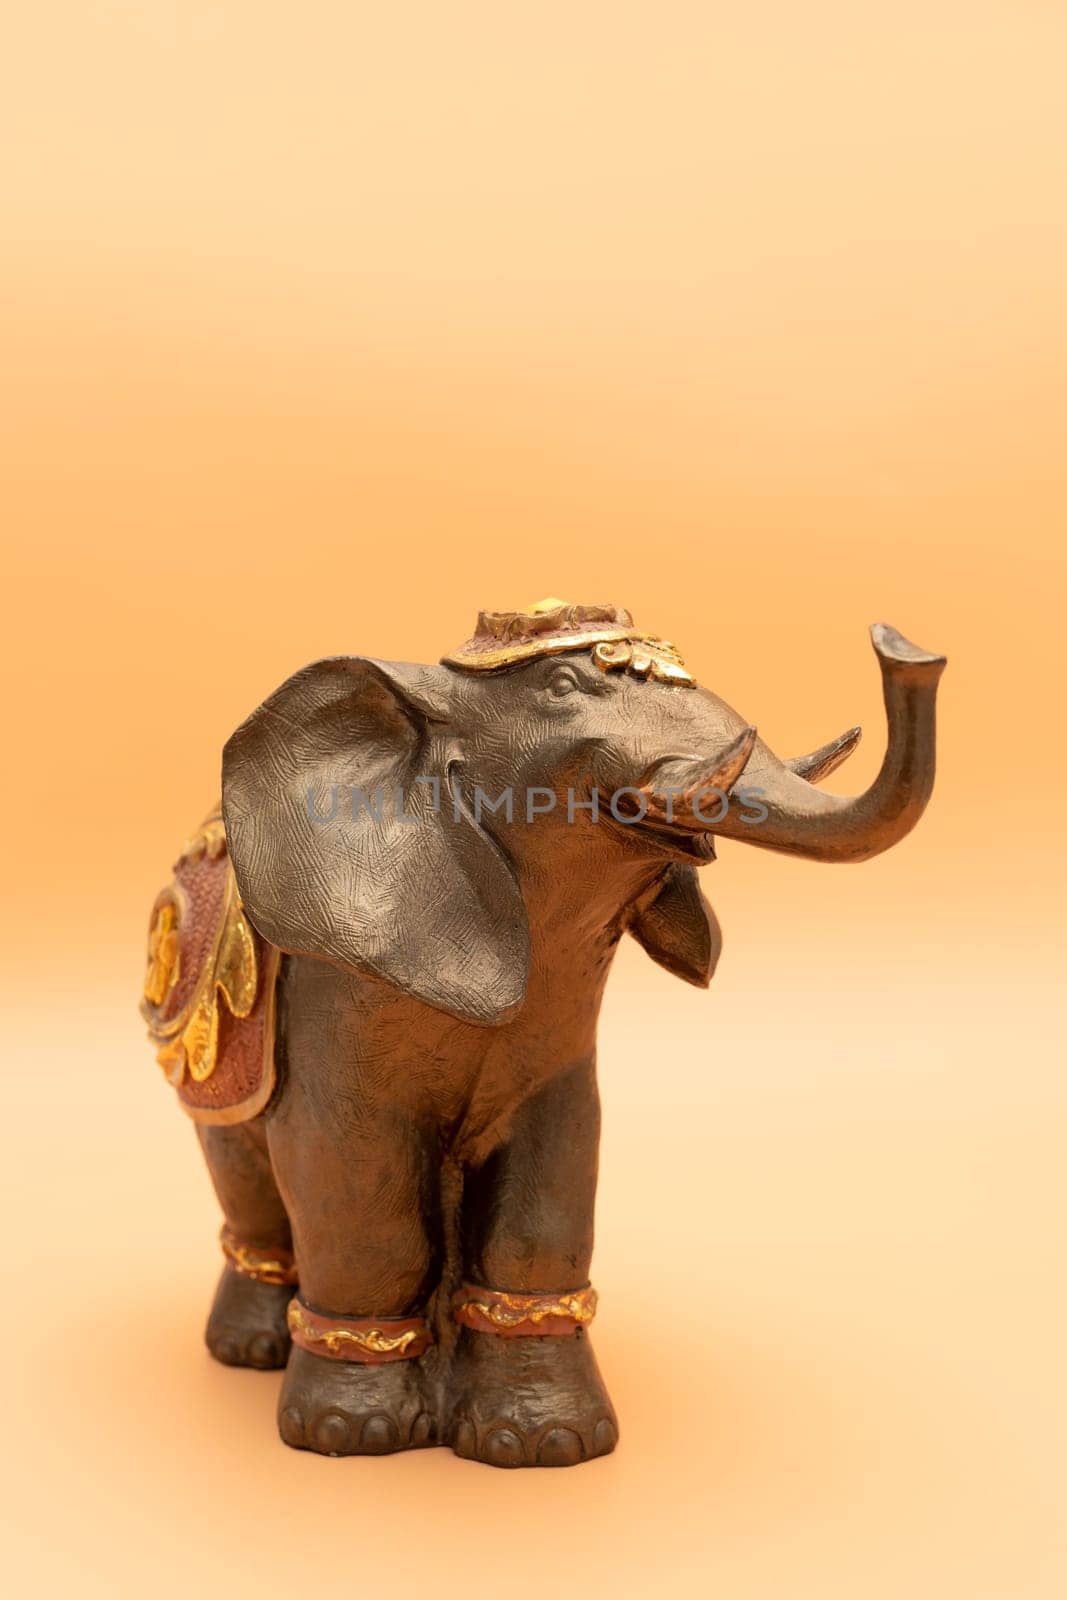 Template World Elephant Day. Bronze Decorated Elephant On Peach Yellow Background. Copy Space For Text. Ganesha Chaturthi Holiday. Sacred Symbol In Hindu, Buddhist Religions. Design, Vertical Plane